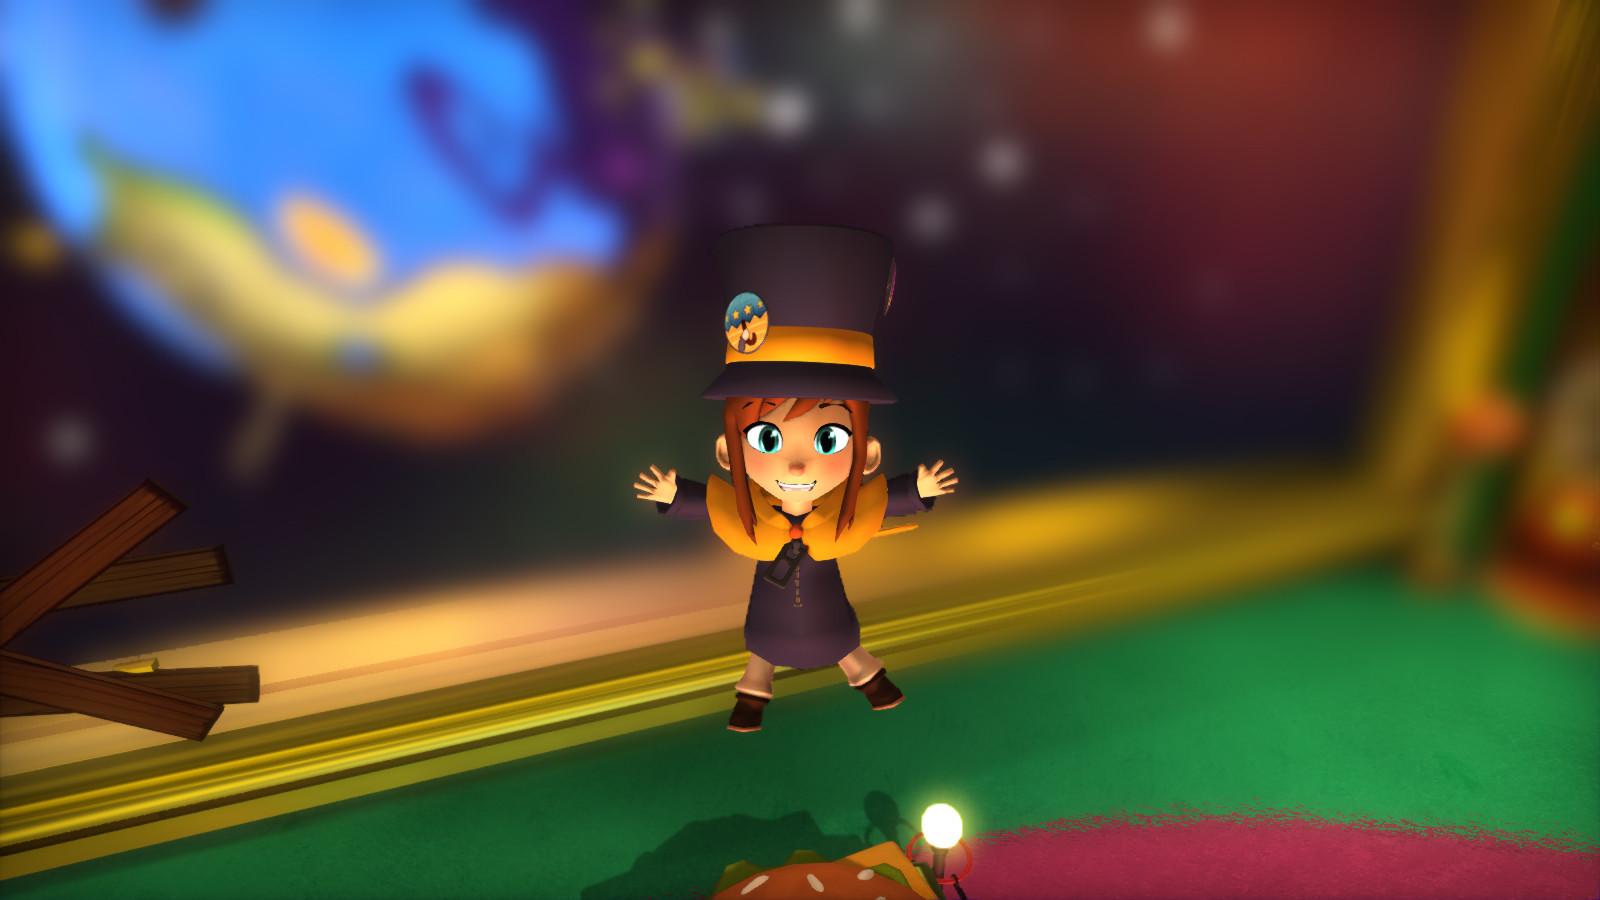 Hat Kid - A Hat in Time [2] wallpaper - Game wallpapers - #24191